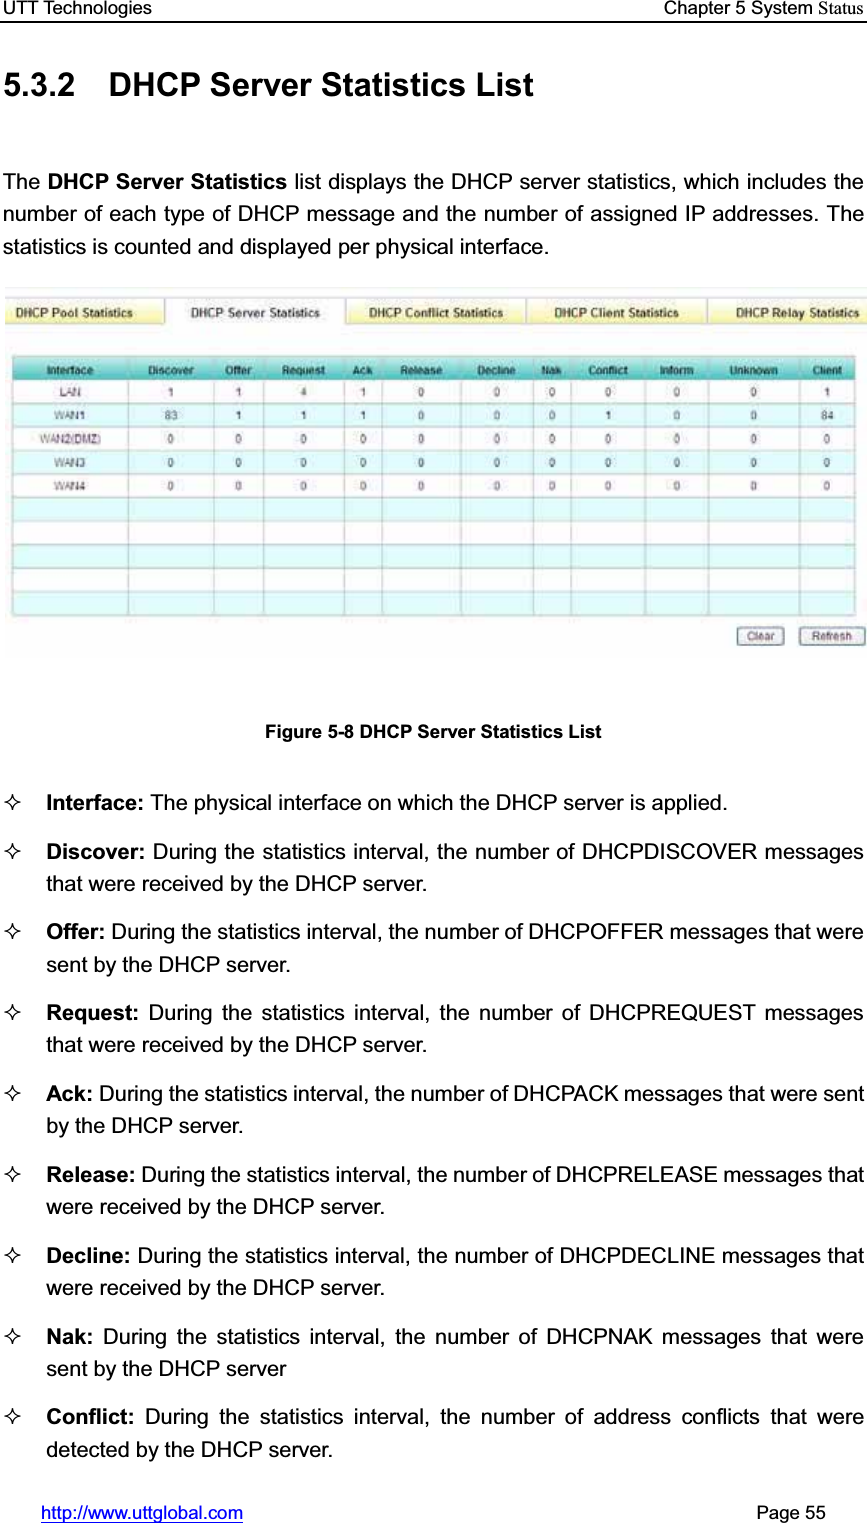 UTT Technologies    Chapter 5 System Statushttp://www.uttglobal.com                                                       Page 55 5.3.2 DHCP Server Statistics List The DHCP Server Statistics list displays the DHCP server statistics, which includes the number of each type of DHCP message and the number of assigned IP addresses. The statistics is counted and displayed per physical interface. Figure 5-8 DHCP Server Statistics List Interface: The physical interface on which the DHCP server is applied.Discover: During the statistics interval, the number of DHCPDISCOVER messages that were received by the DHCP server.   Offer: During the statistics interval, the number of DHCPOFFER messages that were sent by the DHCP server. Request: During the statistics interval, the number of DHCPREQUEST messages that were received by the DHCP server. Ack: During the statistics interval, the number of DHCPACK messages that were sent by the DHCP server. Release: During the statistics interval, the number of DHCPRELEASE messages that were received by the DHCP server. Decline: During the statistics interval, the number of DHCPDECLINE messages that were received by the DHCP server. Nak:  During the statistics interval, the number of DHCPNAK messages that were sent by the DHCP server Conflict:  During the statistics interval, the number of address conflicts that were detected by the DHCP server. 